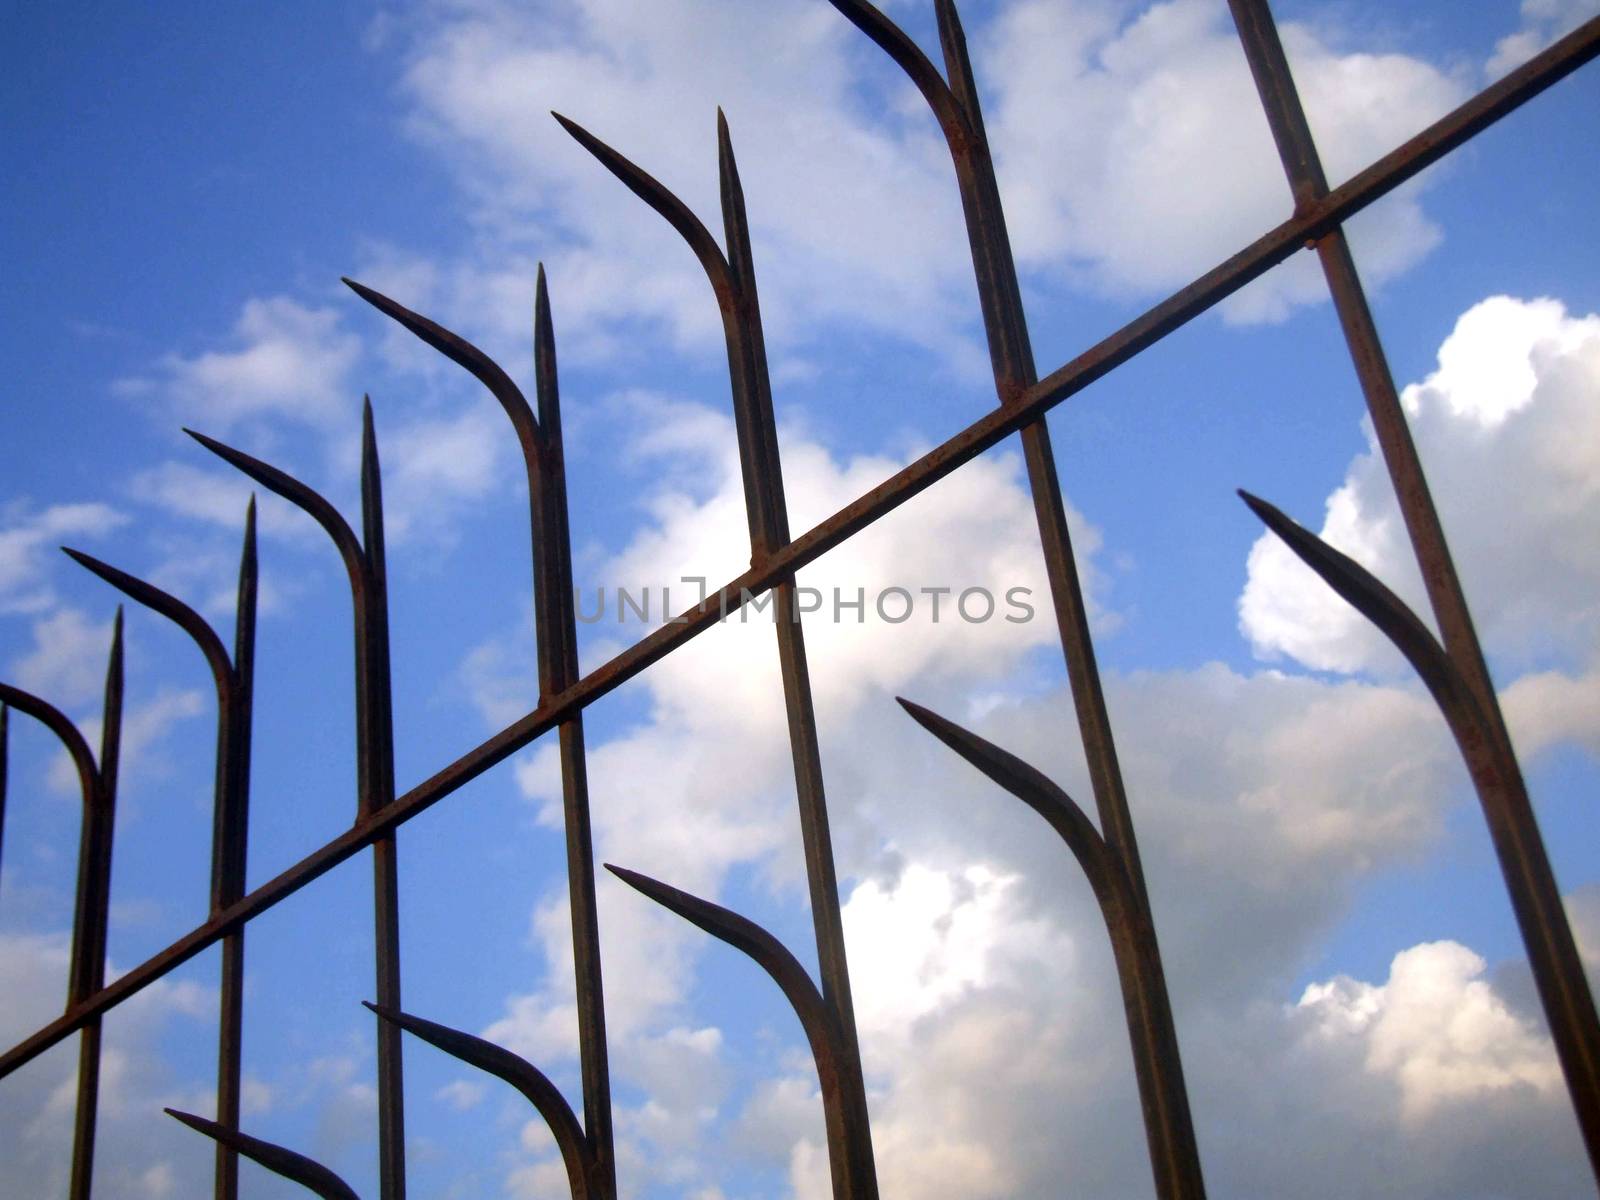 Iron Fence Wall in Prison by e22xua